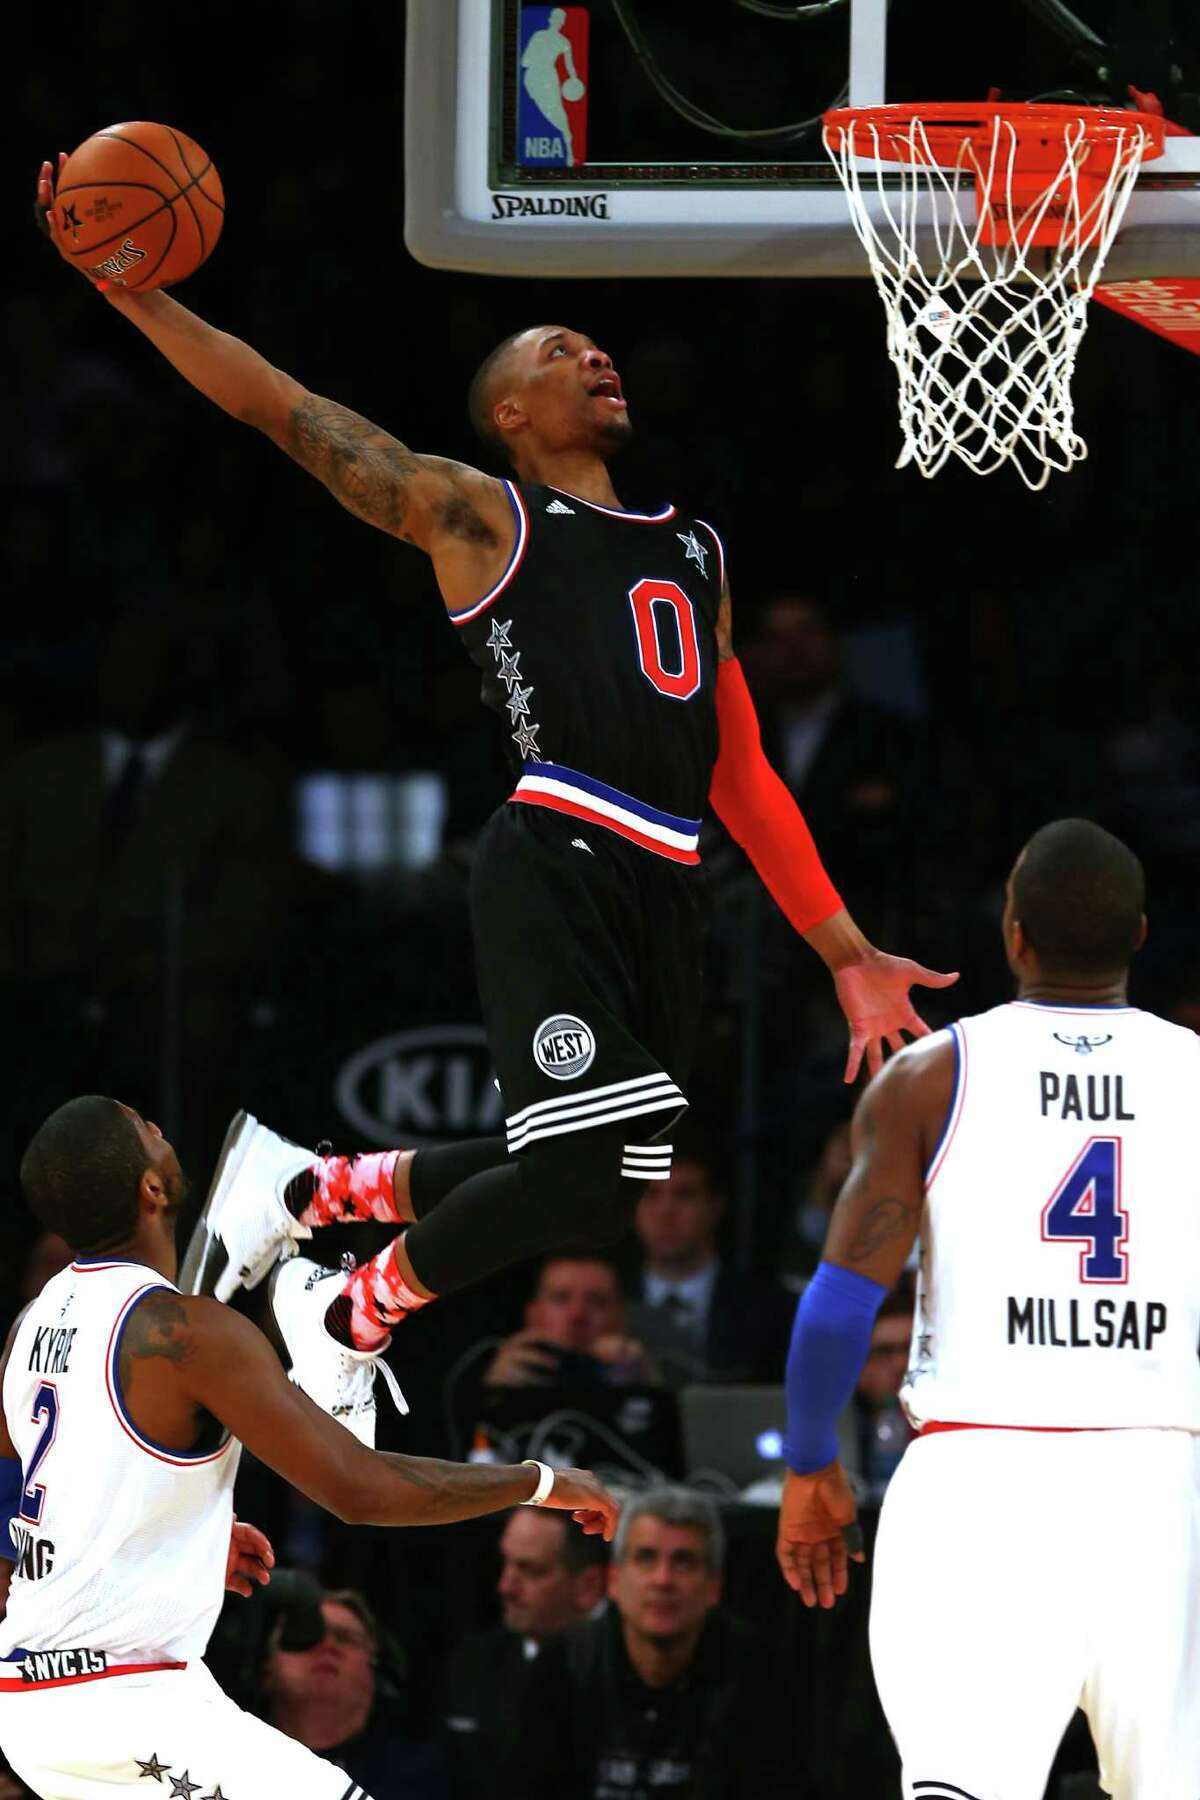 NEW YORK, NY - FEBRUARY 15: Russell Westbrook #0 of the Oklahoma City Thunder and the Western Conference dunks the ball in the second half during the 2015 NBA All-Star Game at Madison Square Garden on February 15, 2015 in New York City. NOTE TO USER: User expressly acknowledges and agrees that, by downloading and/or using this photograph, user is consenting to the terms and conditions of the Getty Images License Agreement. (Photo by Elsa/Getty Images)